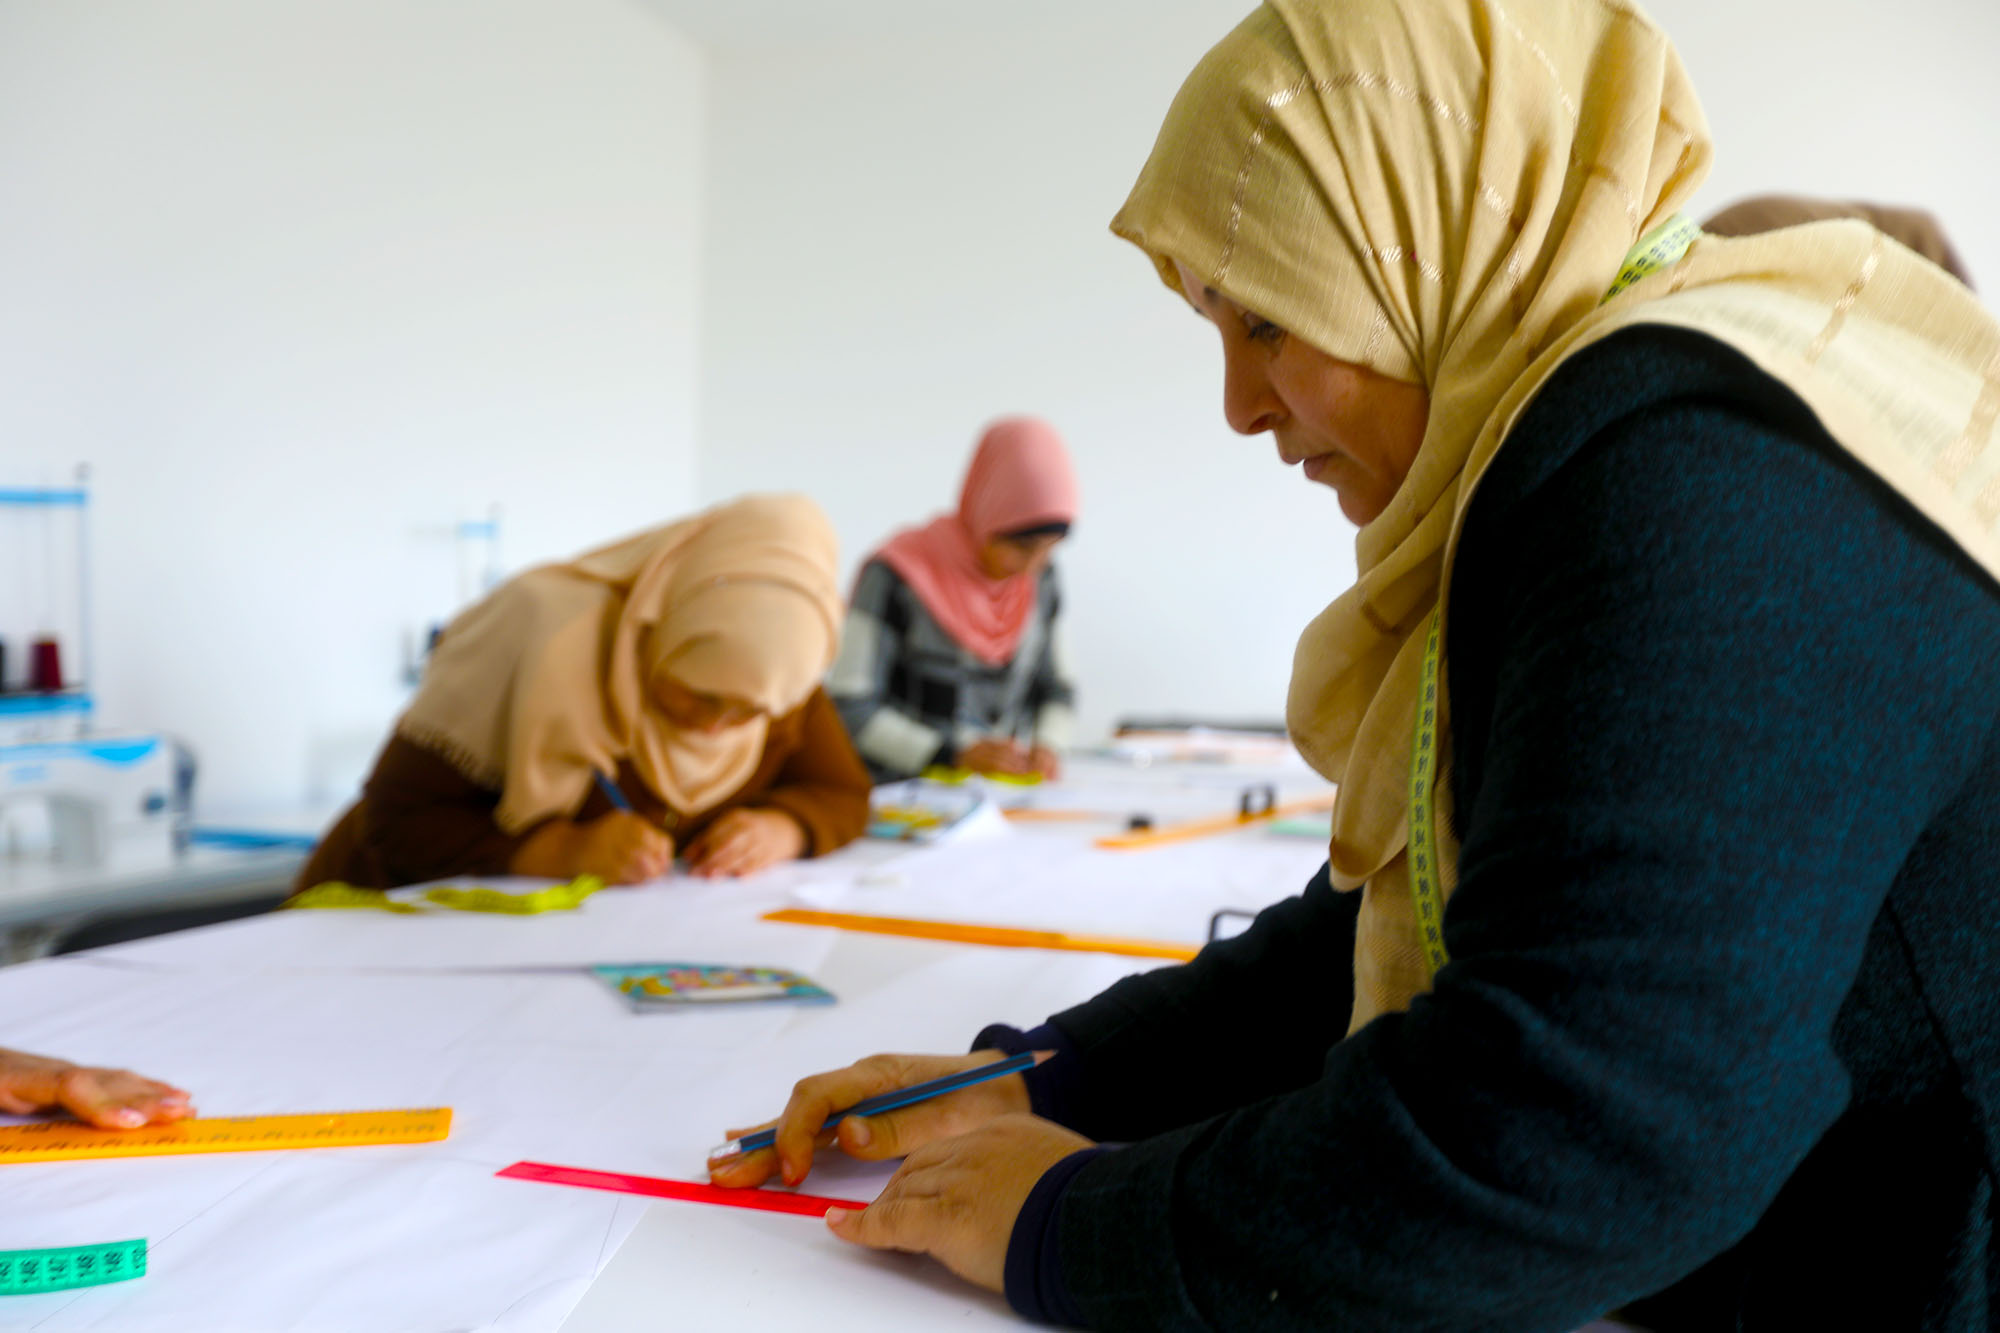 A Palestinian woman measures out the edges of a sewing pattern she is designing as part of a sewing course provided by Anera at the CSSL center in Beit Hanoun, Gaza.